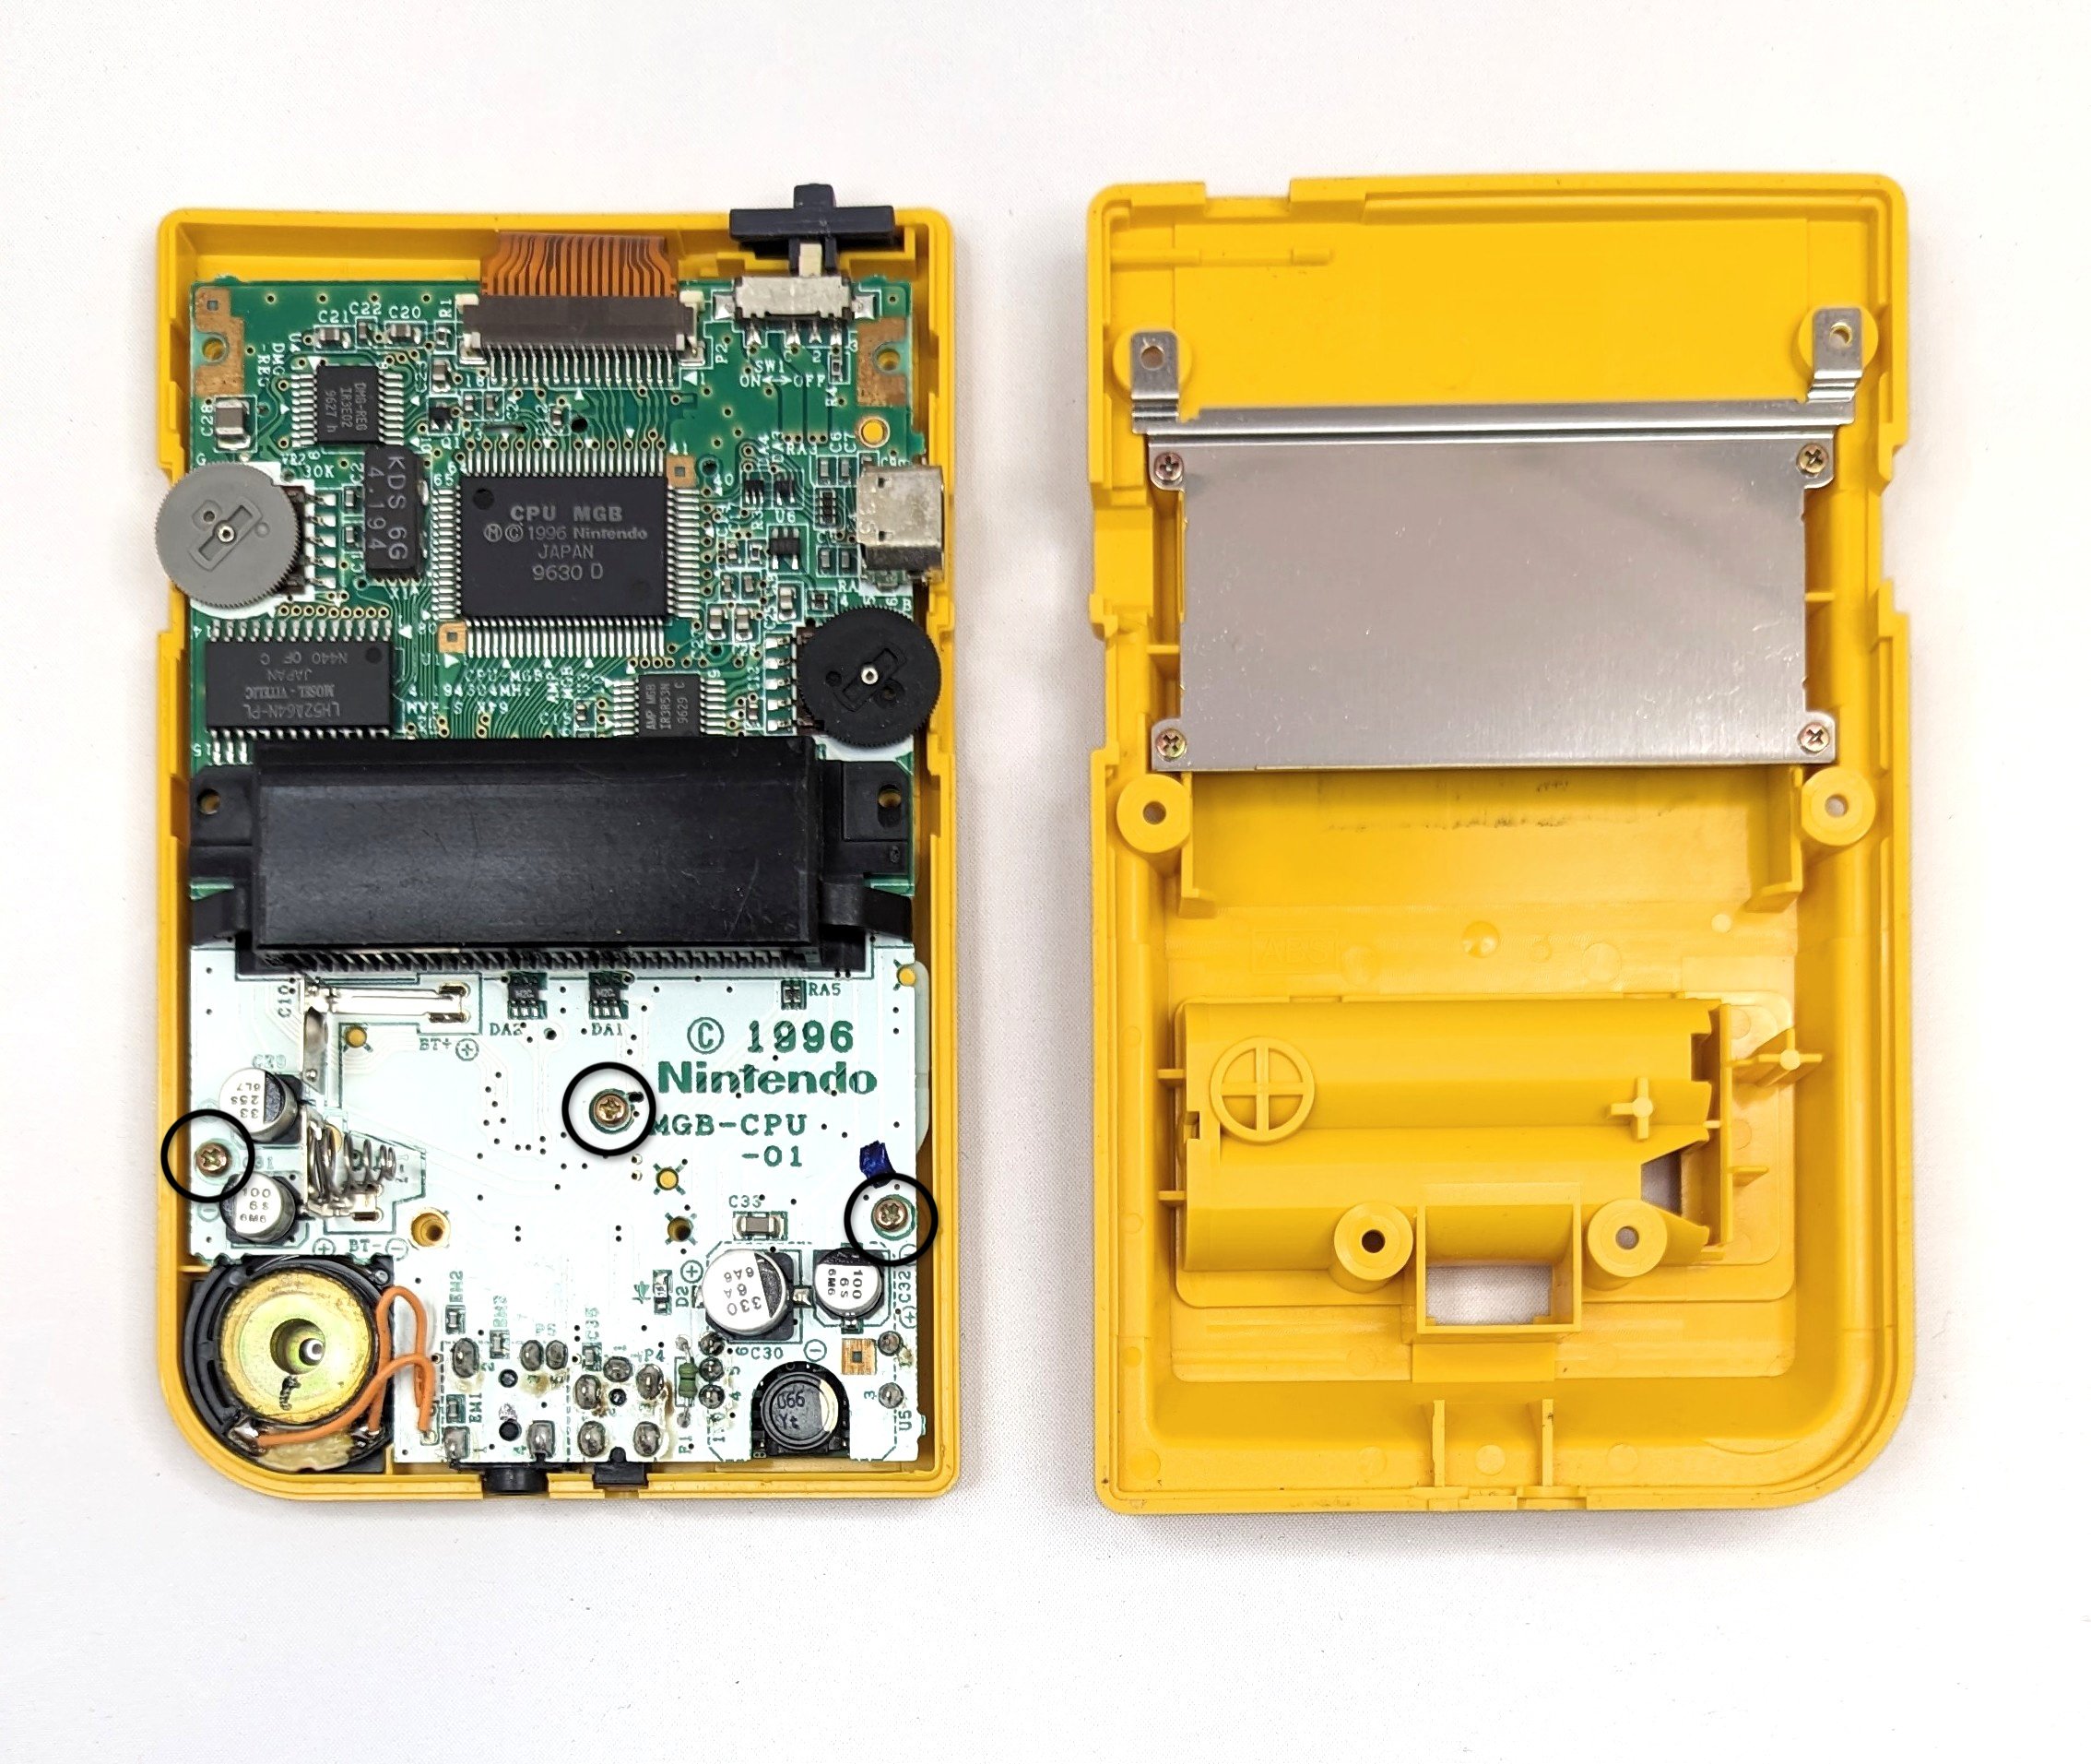 an open game boy pocket witht he pcb exposed and diagrams drawn over the removable screws